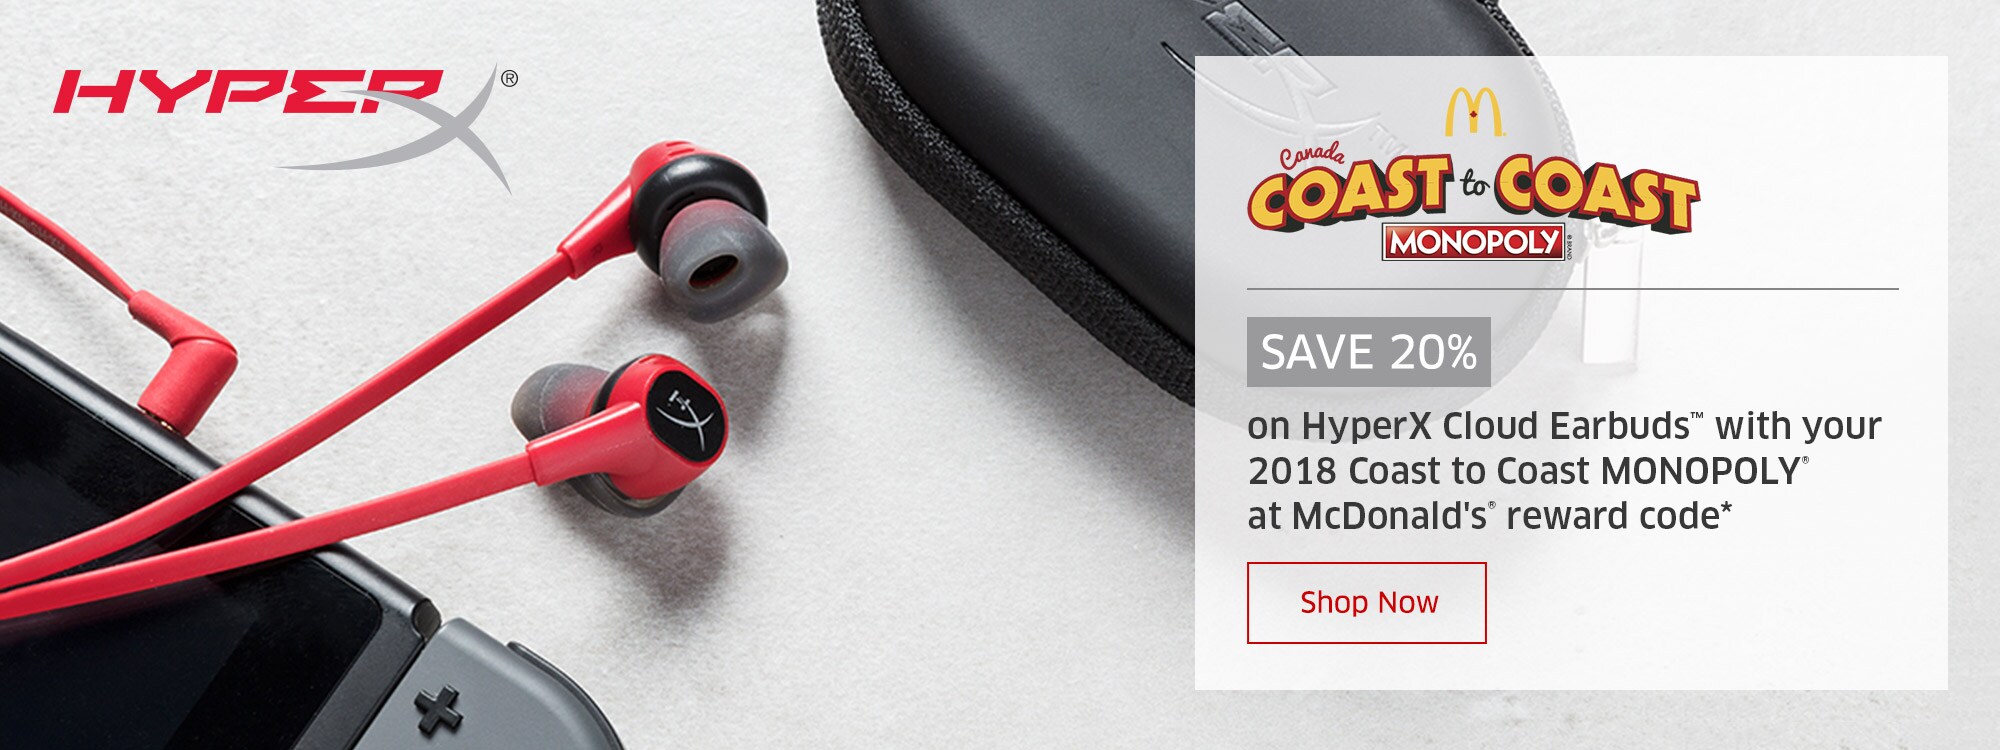 SAVE 20% on HyperX Cloud Earbuds™ with your 2018 Coast to Coast MONOPOLY® at McDonald's® reward code*  Shop Now 